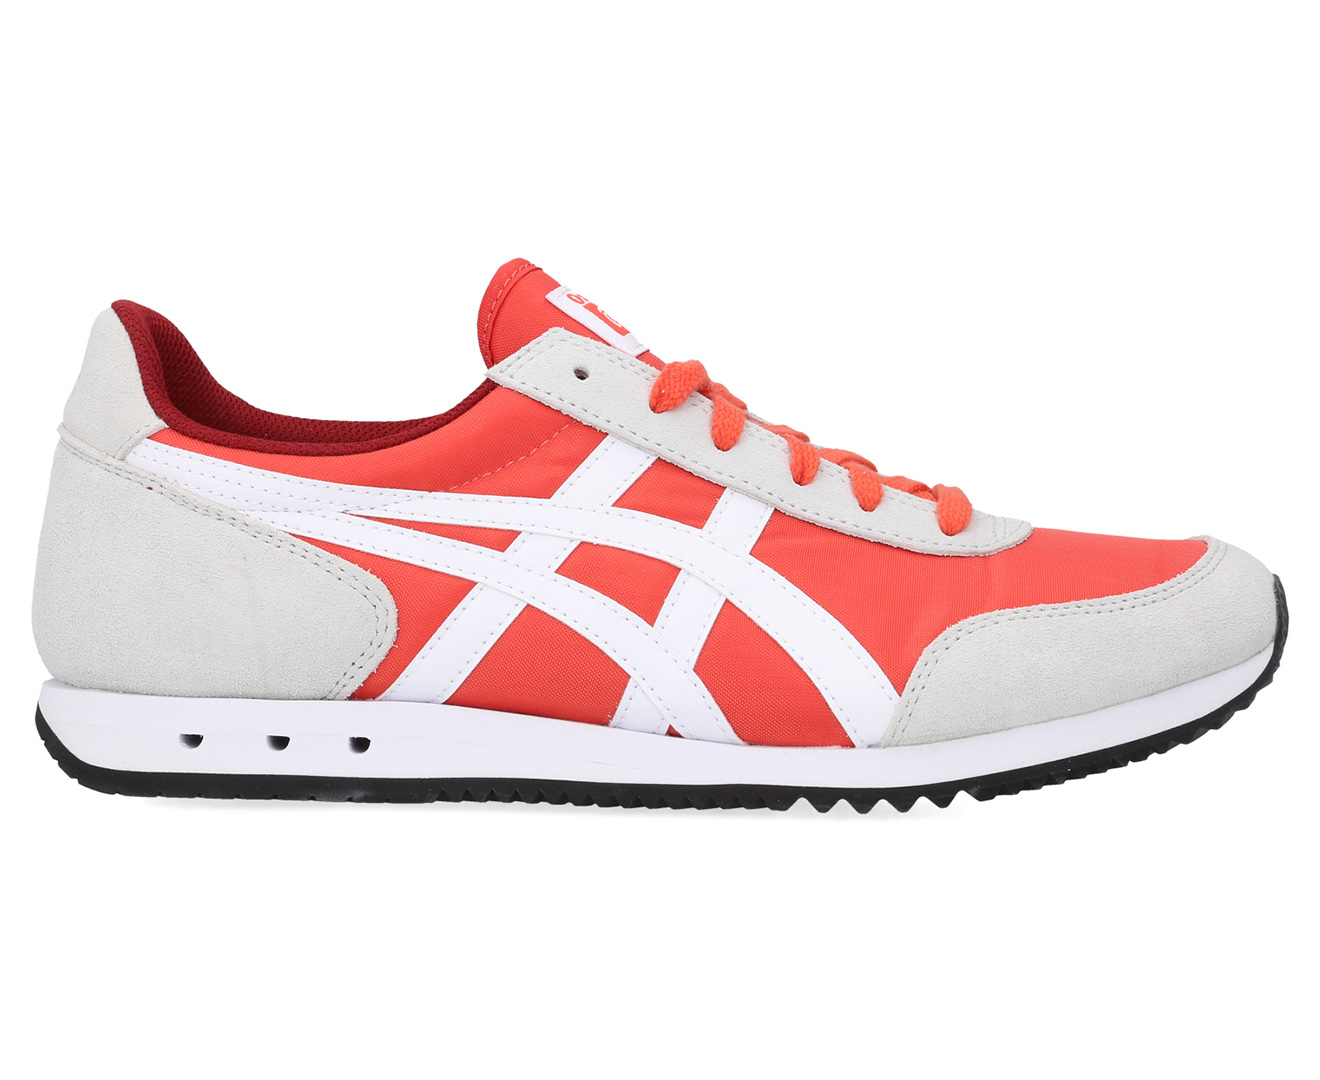 Onitsuka Tiger Men's New York Sneakers - Red Snapper/White | Catch.co.nz